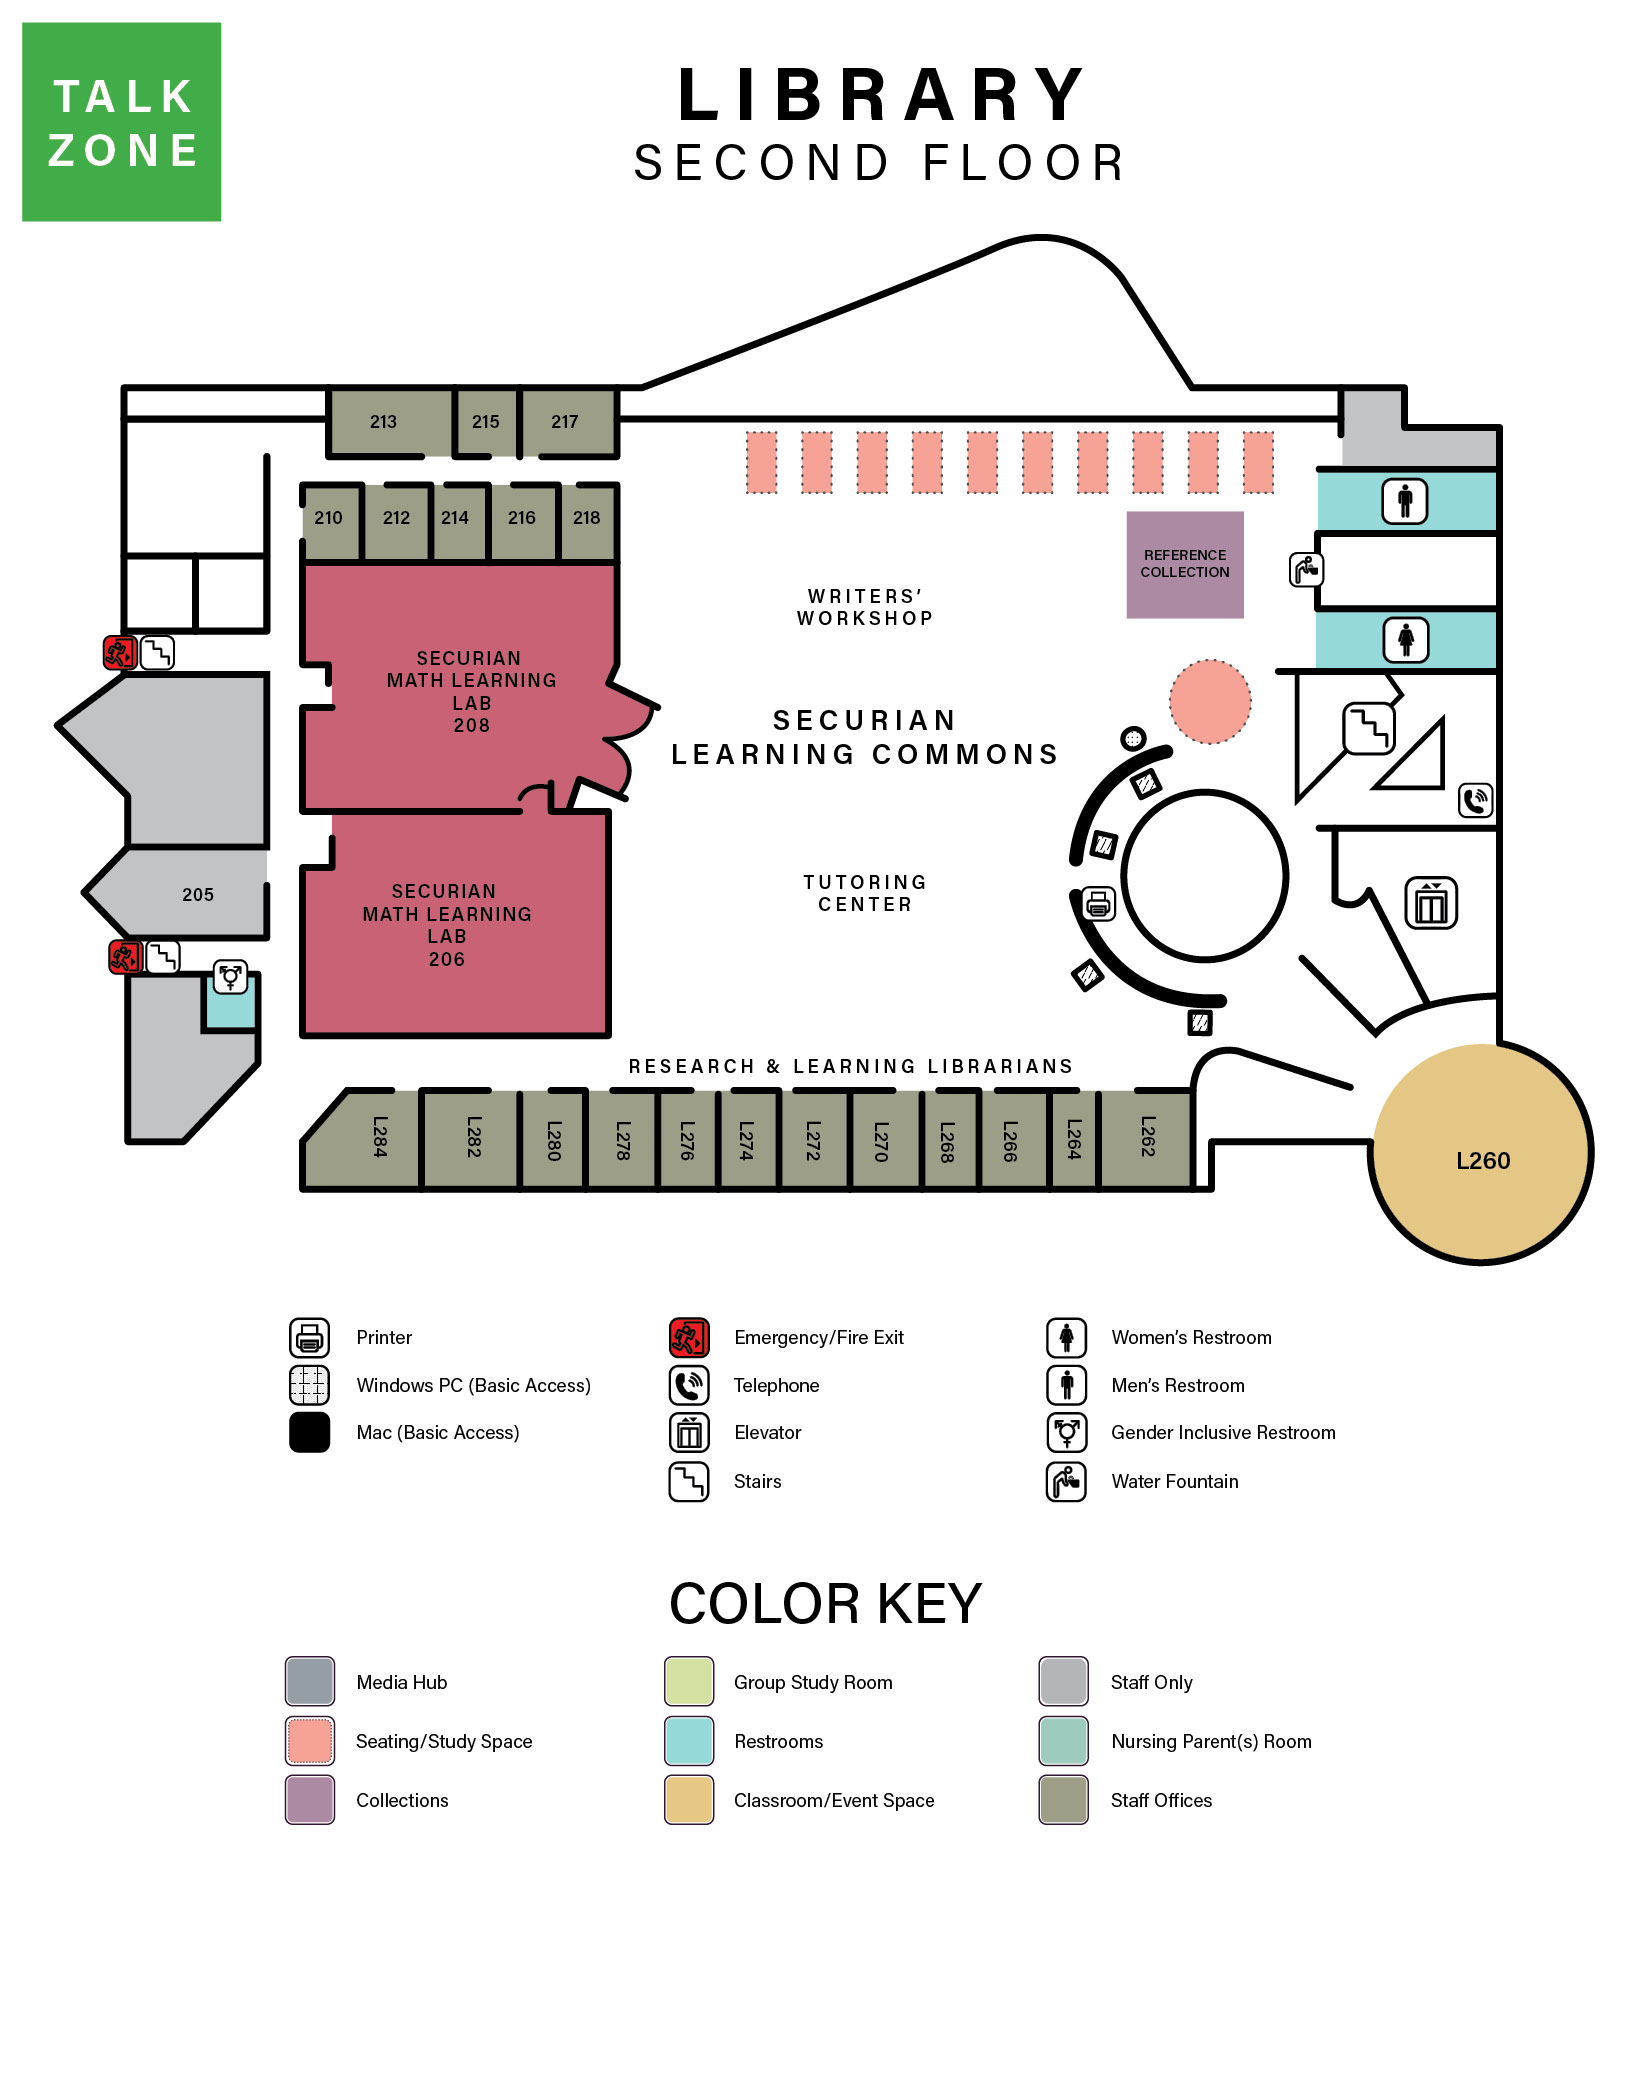 map of library second floor which includes descriptions of spaces and colored areas indicating types of spaces